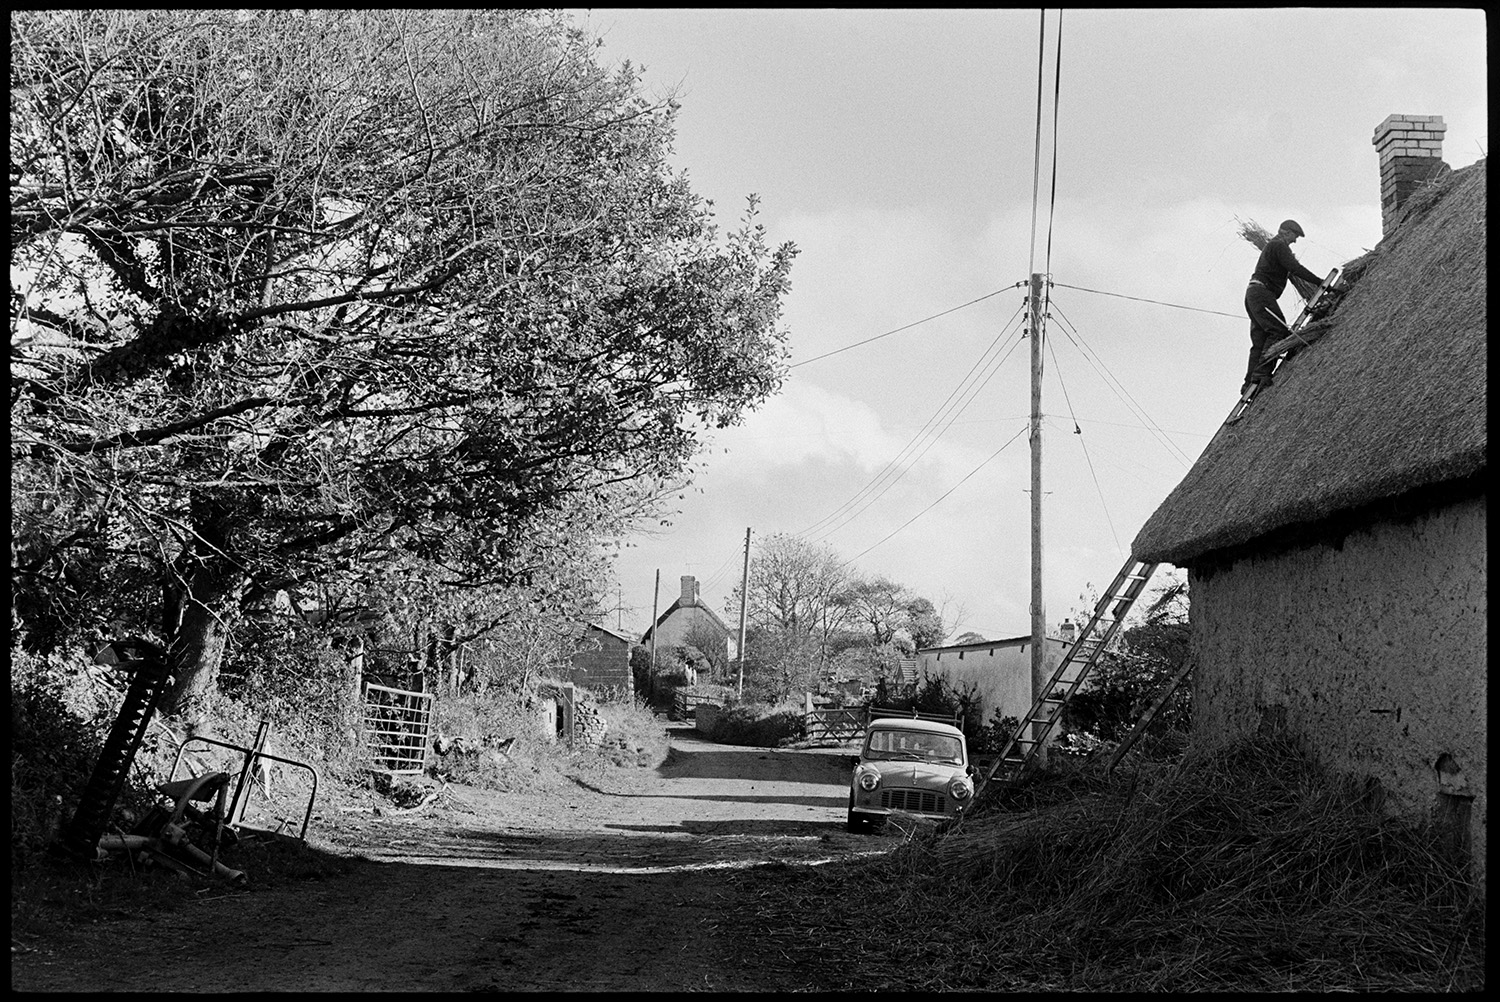 Thatcher working in village and talking to farmer. 
[Stanley Cole up a ladder thatching a cottage roof in Upcott, Dolton. A pile of reed is by the house wall. A truck is parked in the road by the house. A field gate and various items of farm machinery can be seen on the opposite side of the road.]